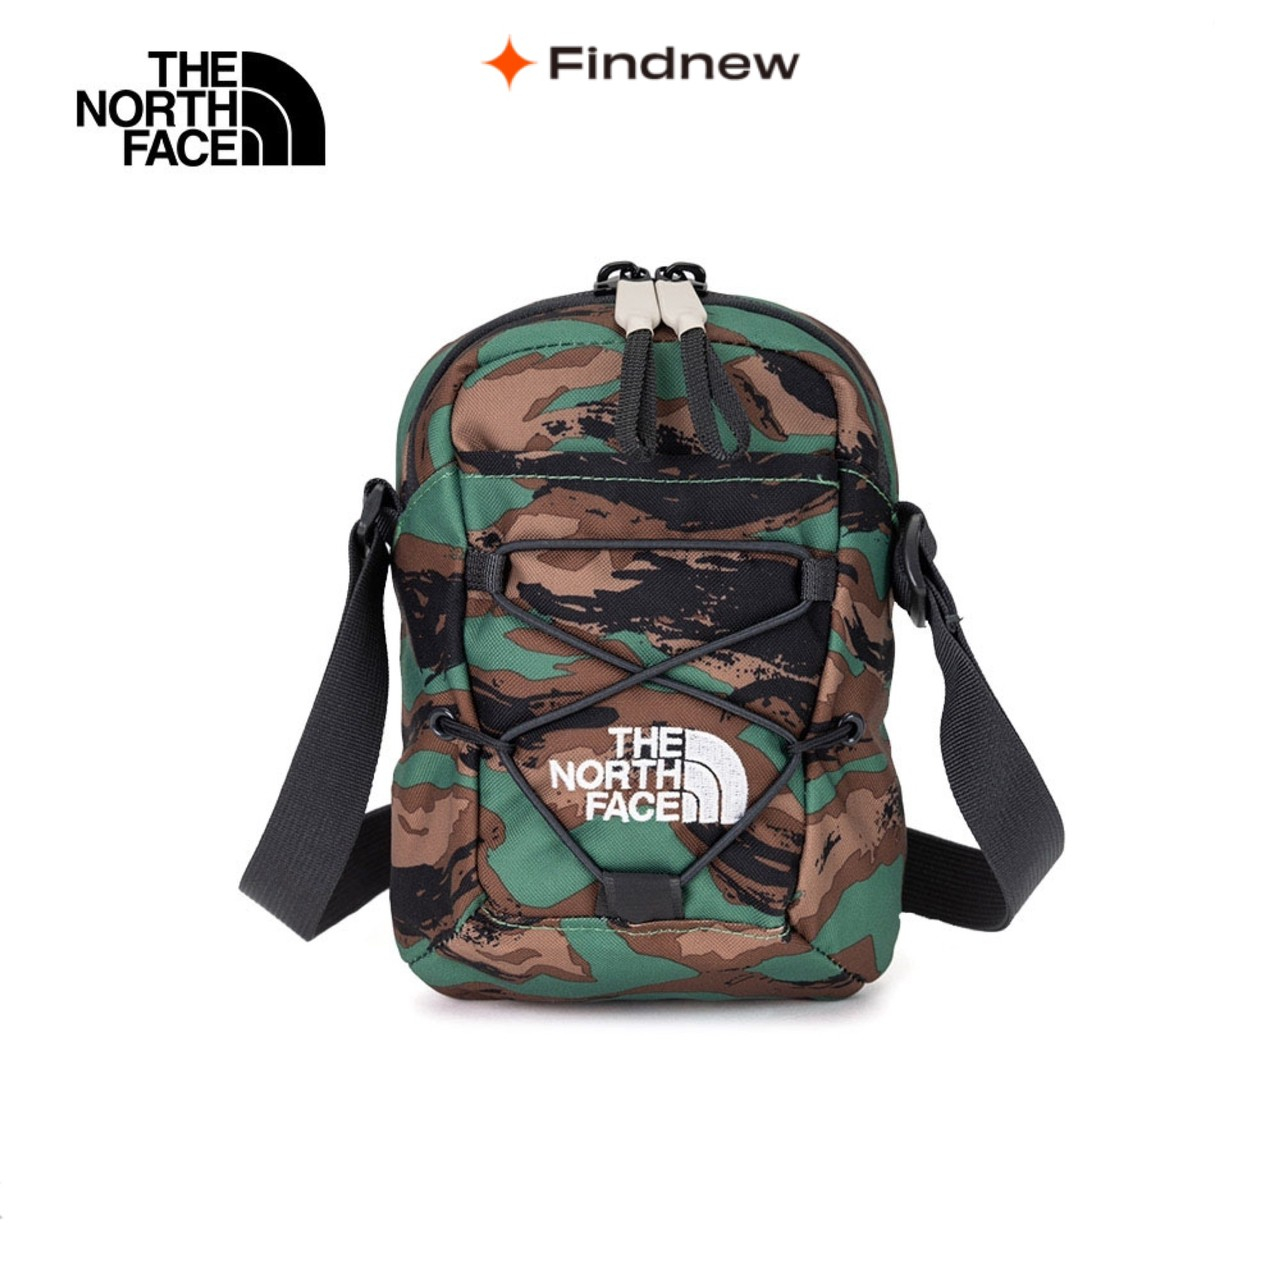 THE NORTH FACE 迷彩側背包 NF0A52UCI3A【Findnew】